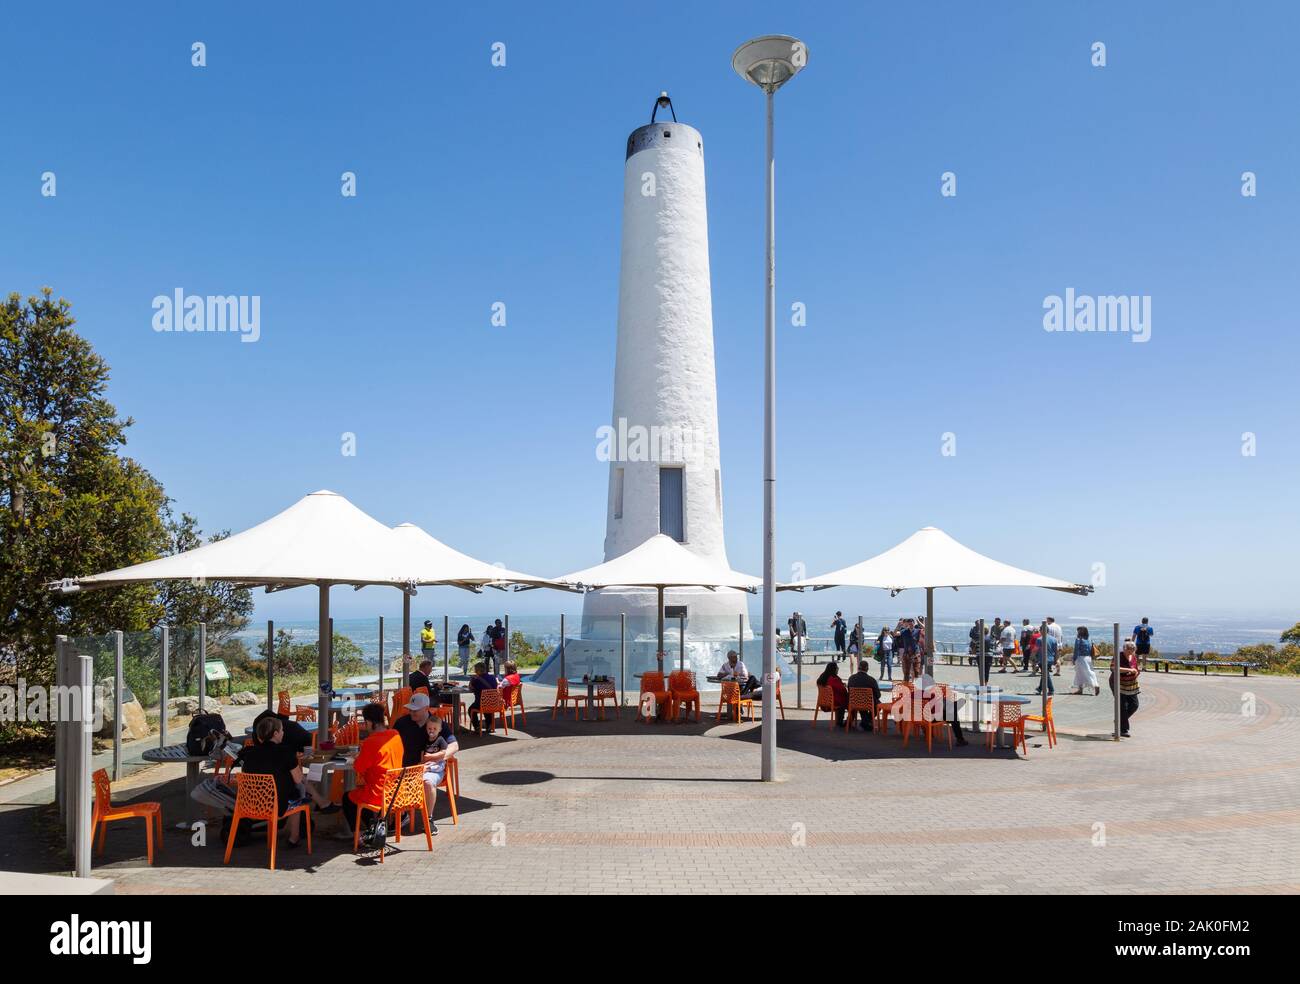 Mount Lofty Adelaide - tourists at the restaurant at the summit of Mt Lofty in the Adelaide Hills, Adelaide Australia Stock Photo